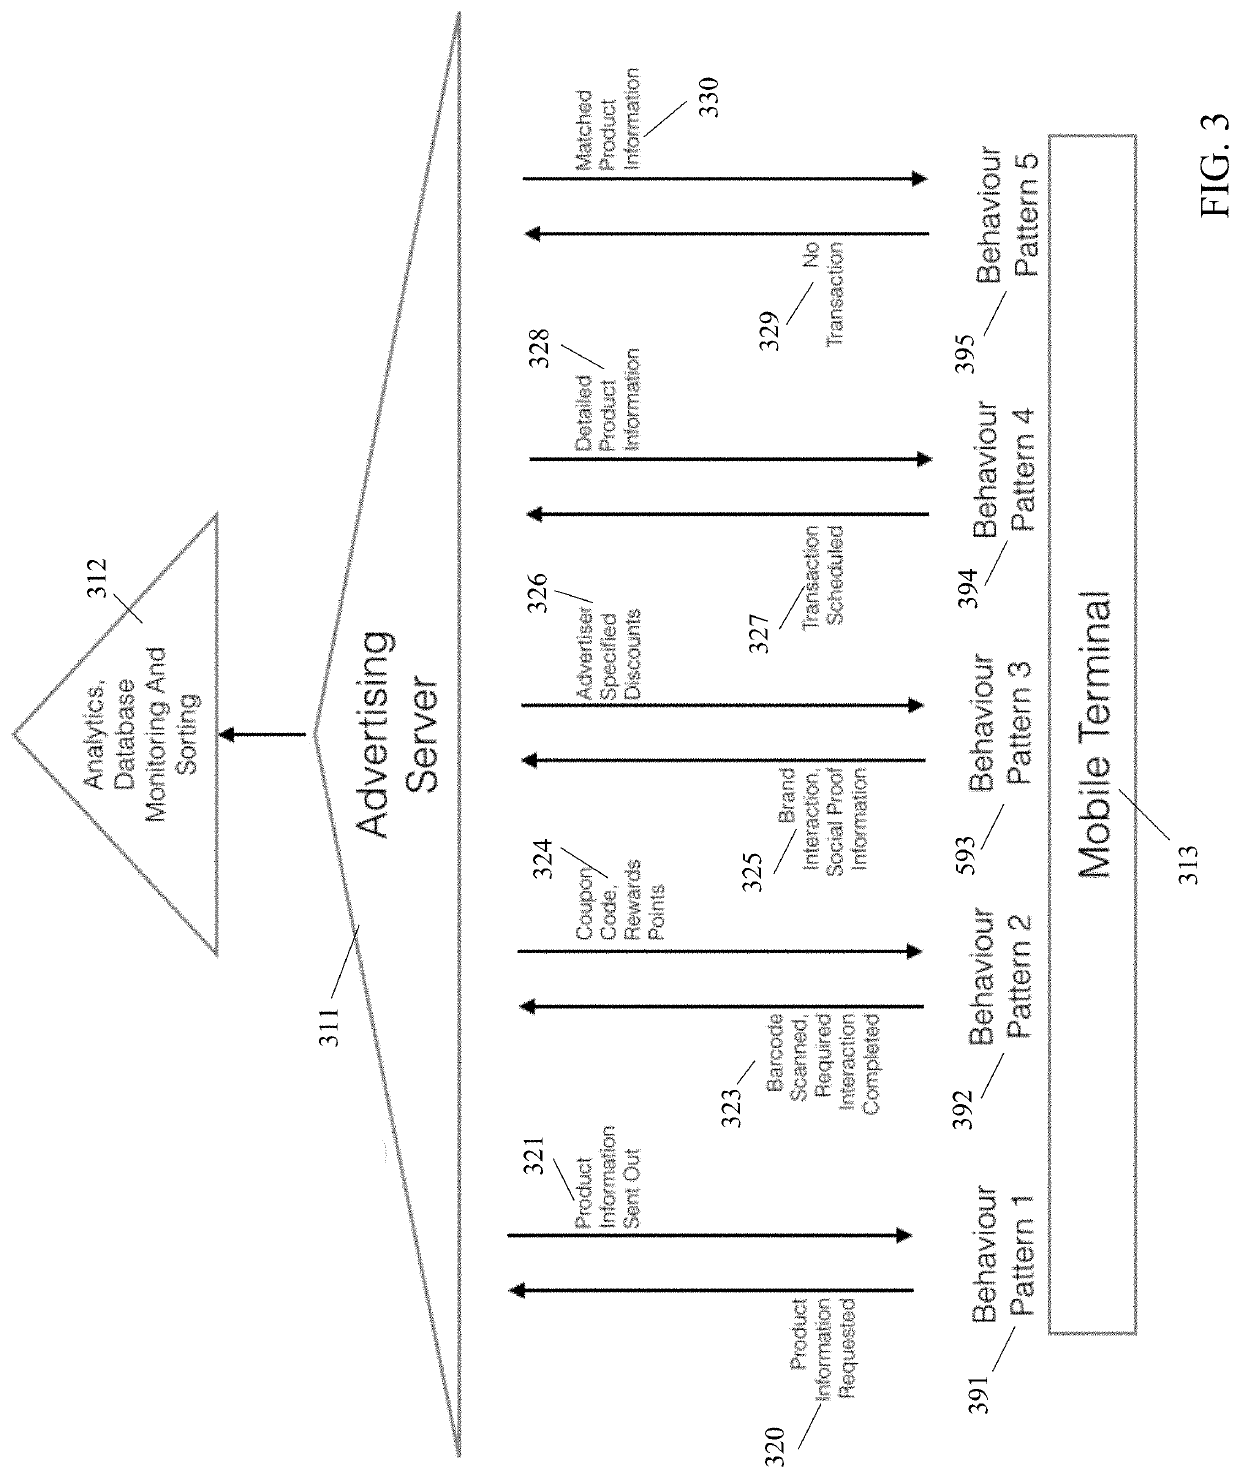 System and method for performance analysis of advertisements across multiple channels